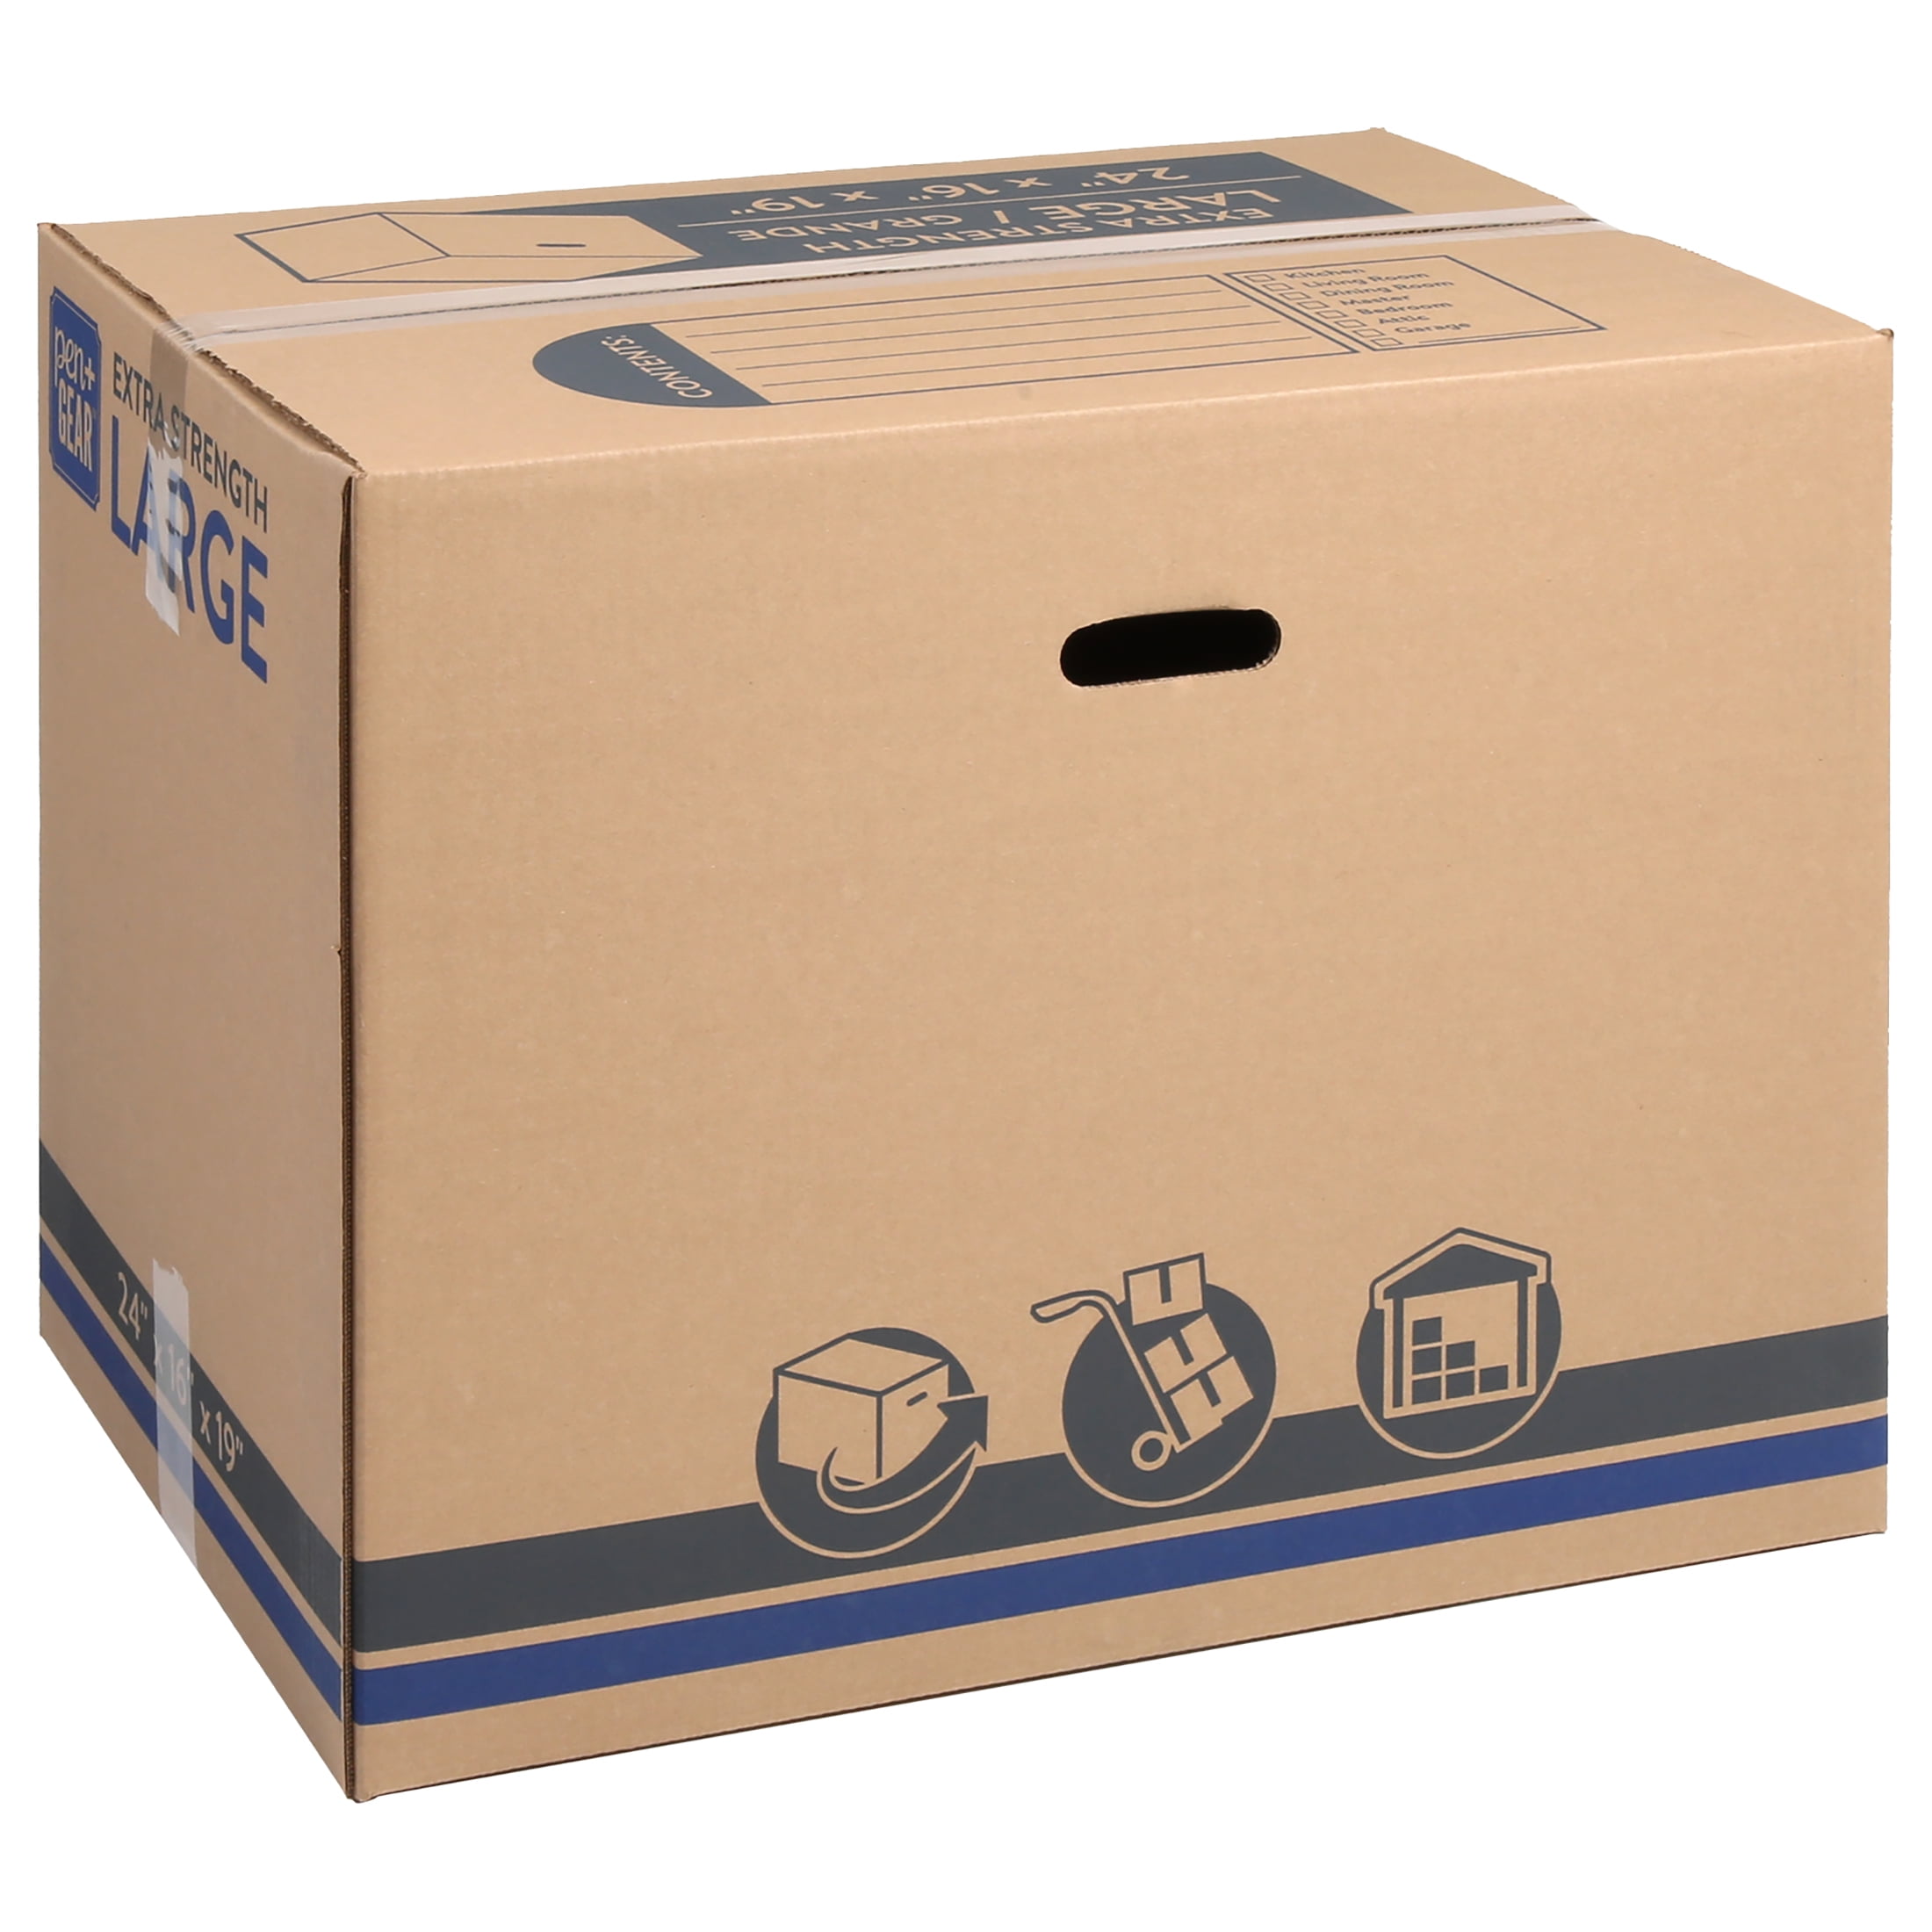 Details about   14x10x12 Moving Box Packaging Boxes Cardboard Corrugated Packing Shipping